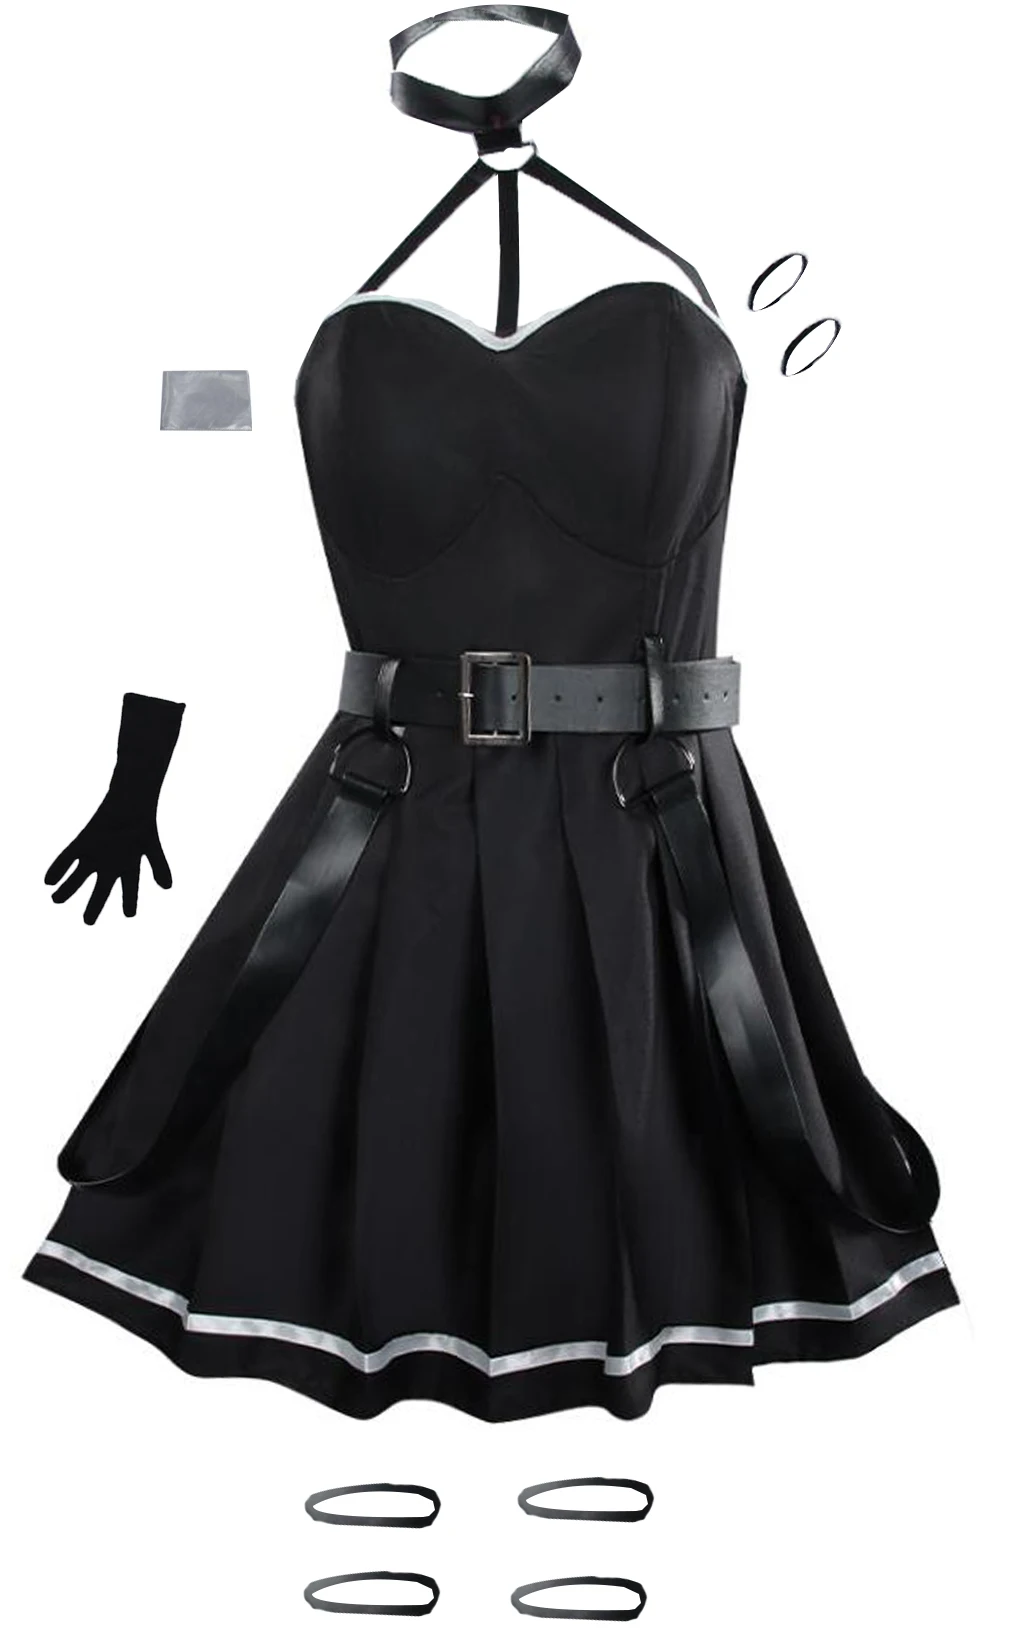 

Anime Frieren Beyond Journey's End Laufen Cosplay Costume Anime Maid Dress Lolita Suit Ubel Uniform Halloween Outfit